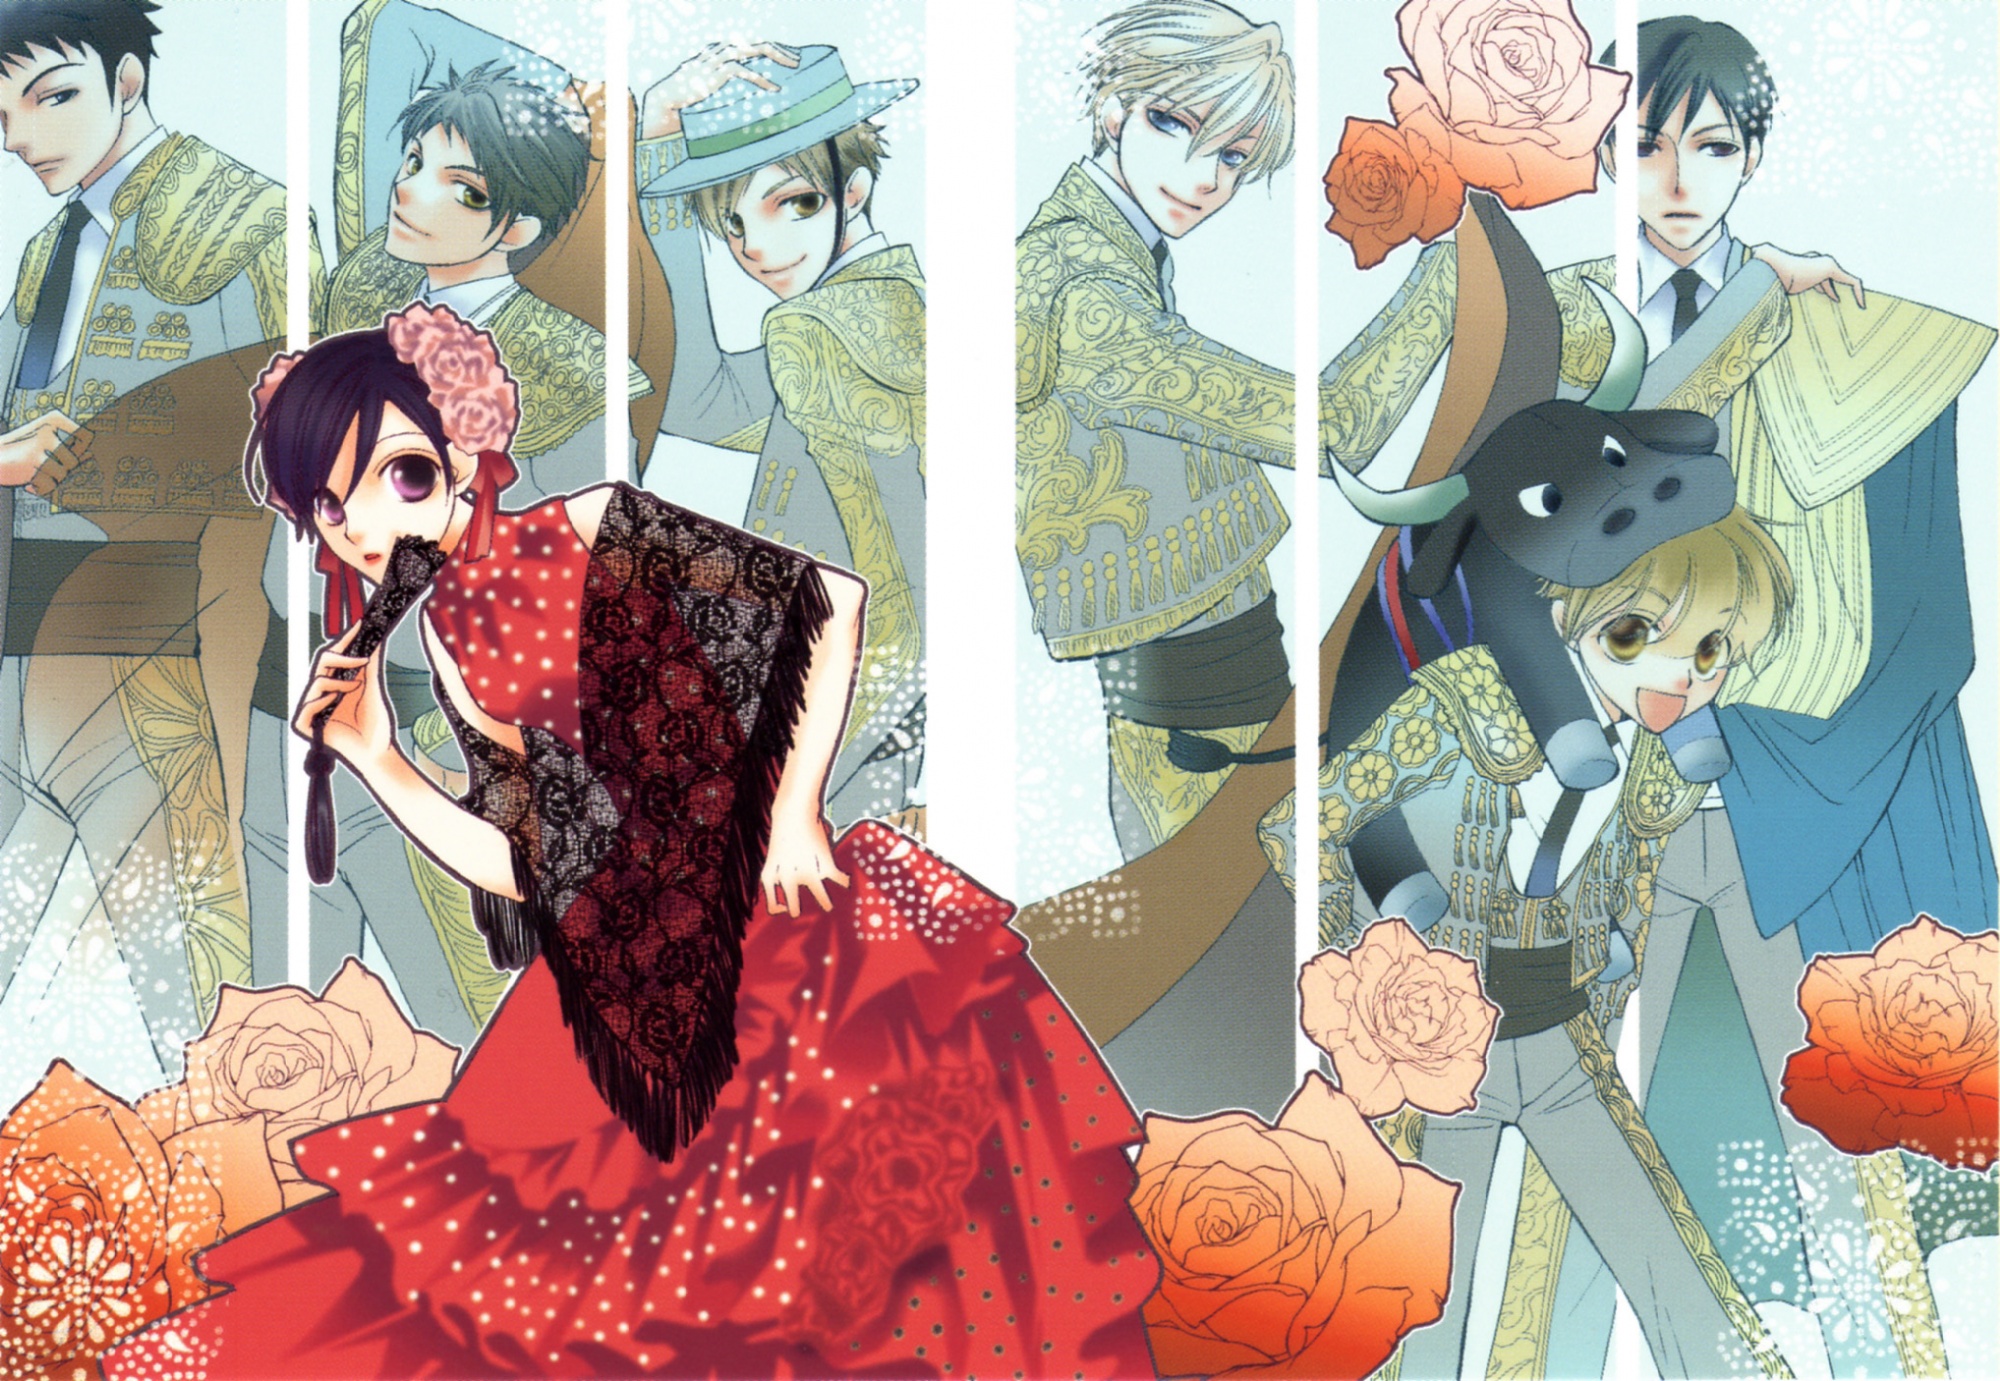 HD desktop wallpaper featuring characters from Ouran High School Host Club anime in elegant attire among roses.